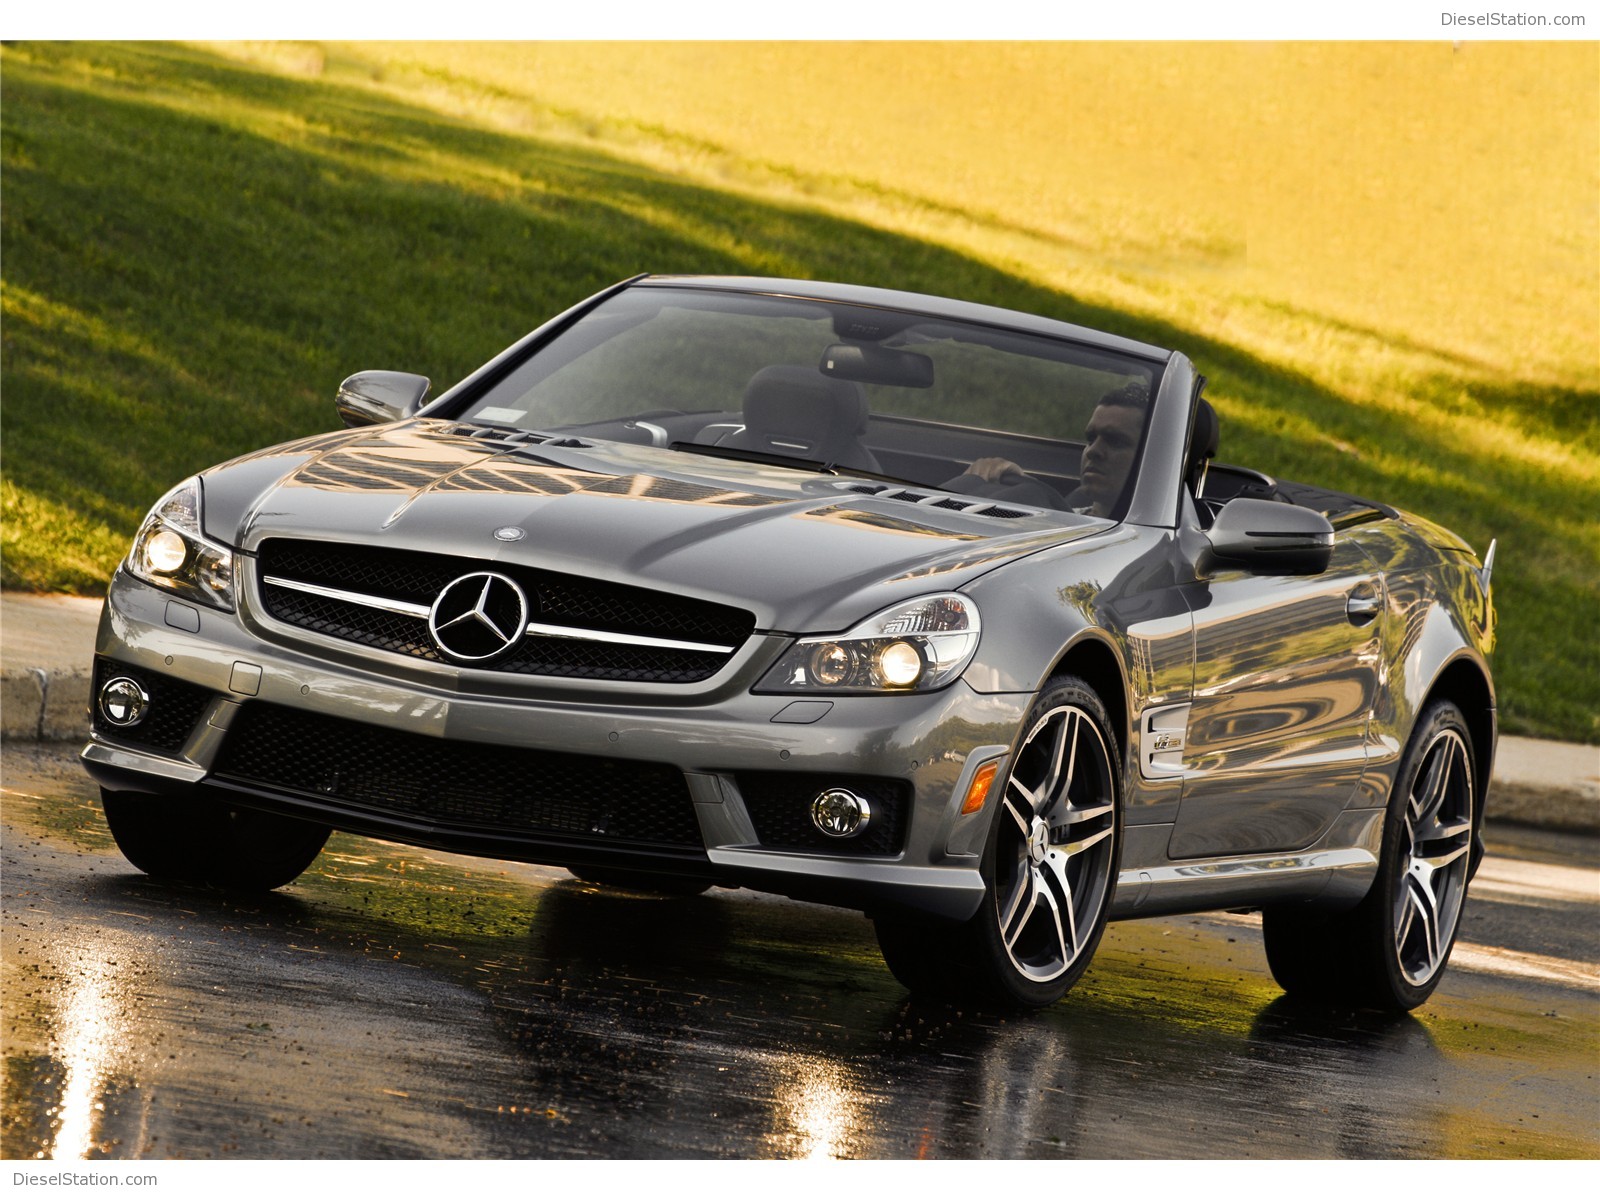 Mercedes Benz Sl63 Amg Exotic Car Pictures Of